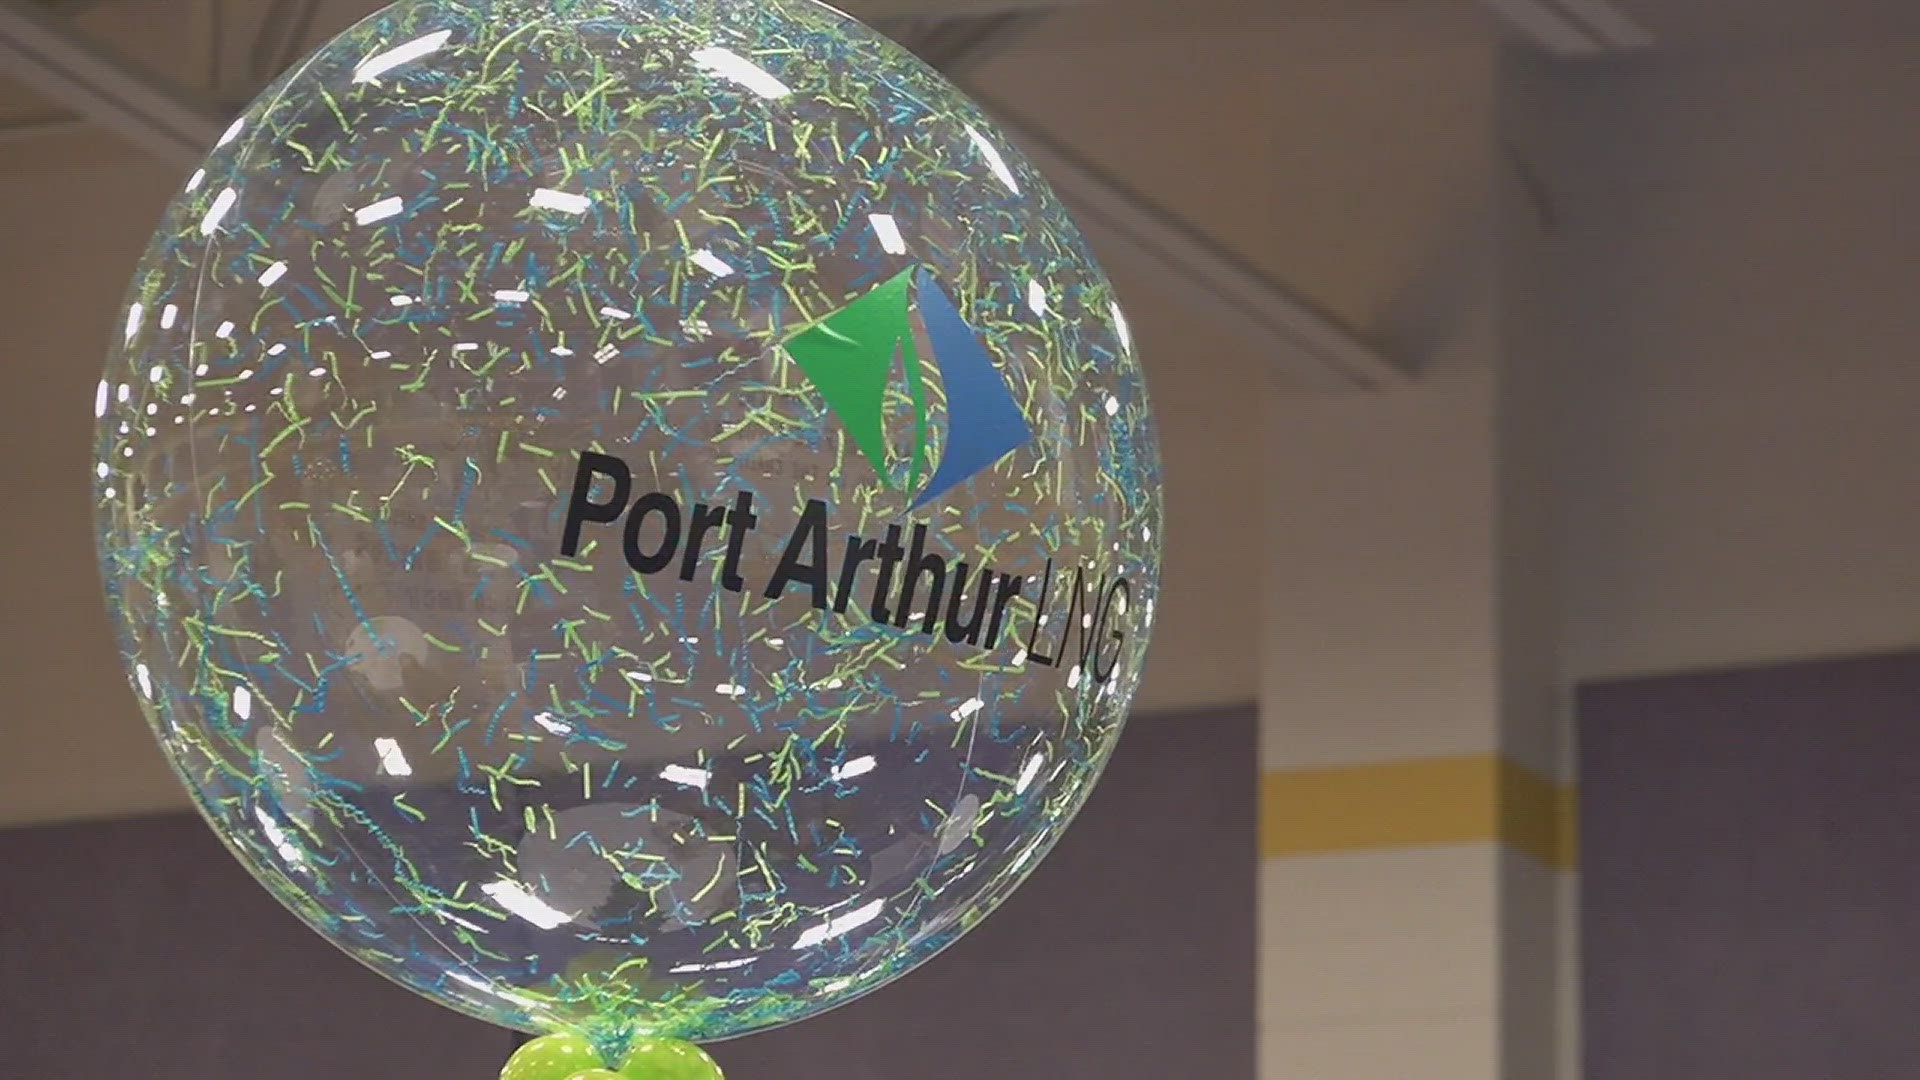 The $13 billion facility will be built along Highway 87, between Port Arthur and Sabine Pass.